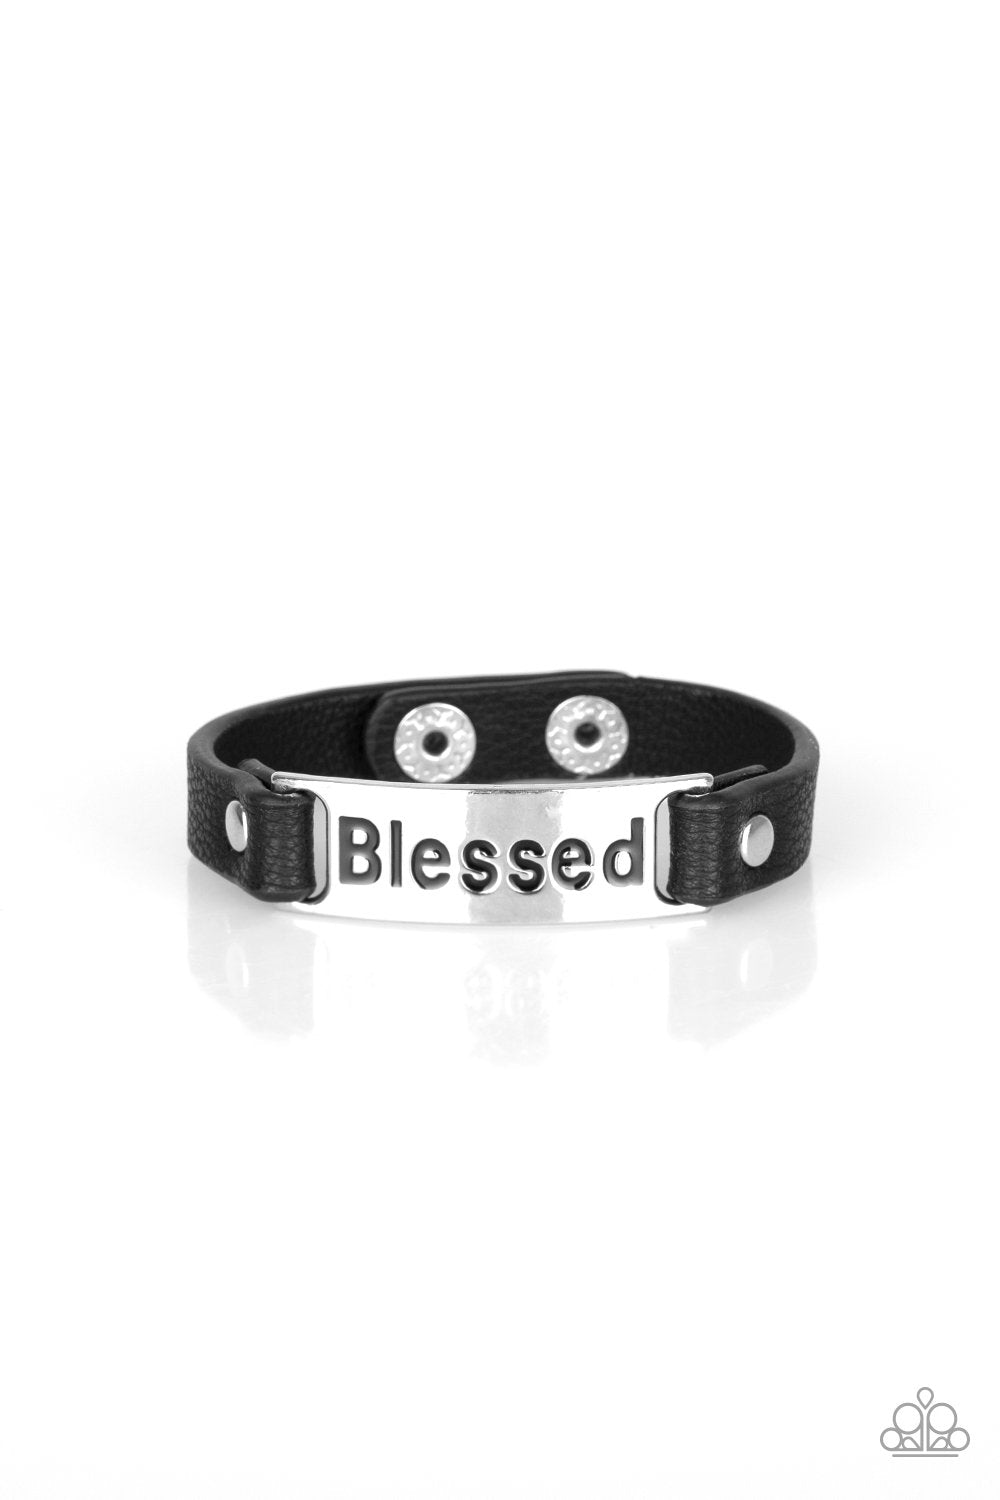 Count Your Blessings Black Wrap Snap Bracelet - Paparazzi Accessories-CarasShop.com - $5 Jewelry by Cara Jewels